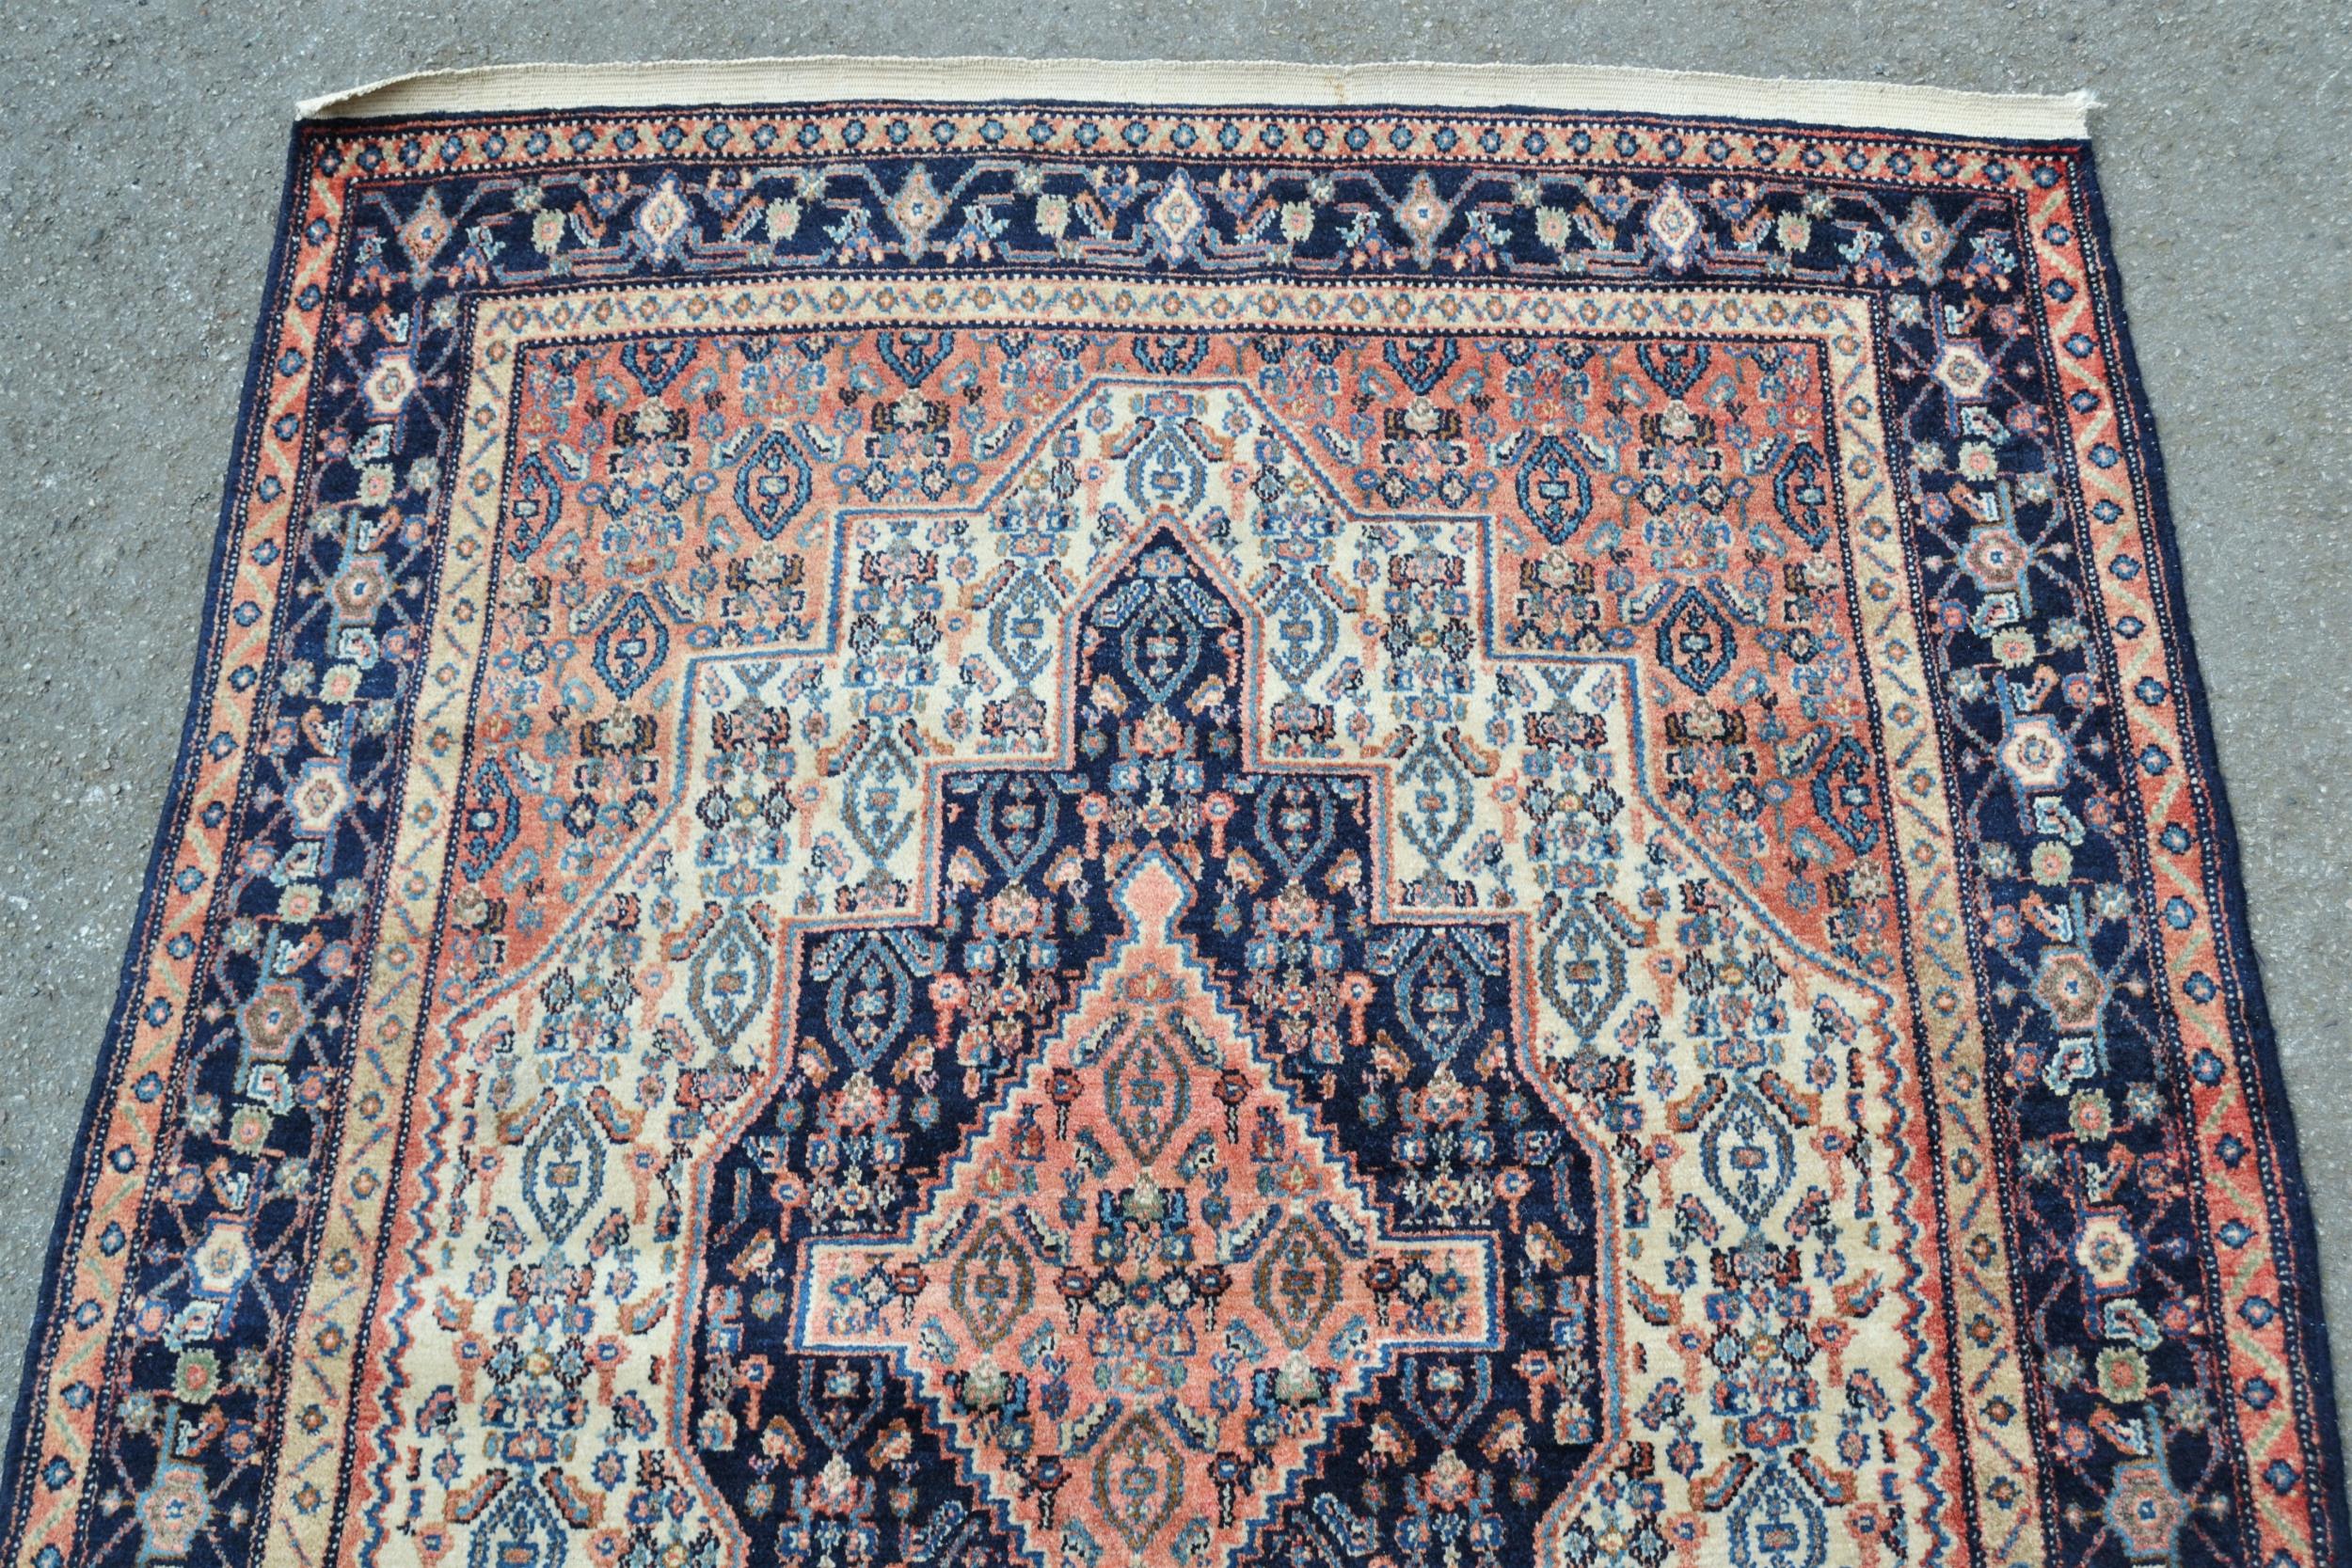 Small Hamadan rug with a medallion and all-over Herati design in shades of rose, midnight blue and - Image 3 of 4